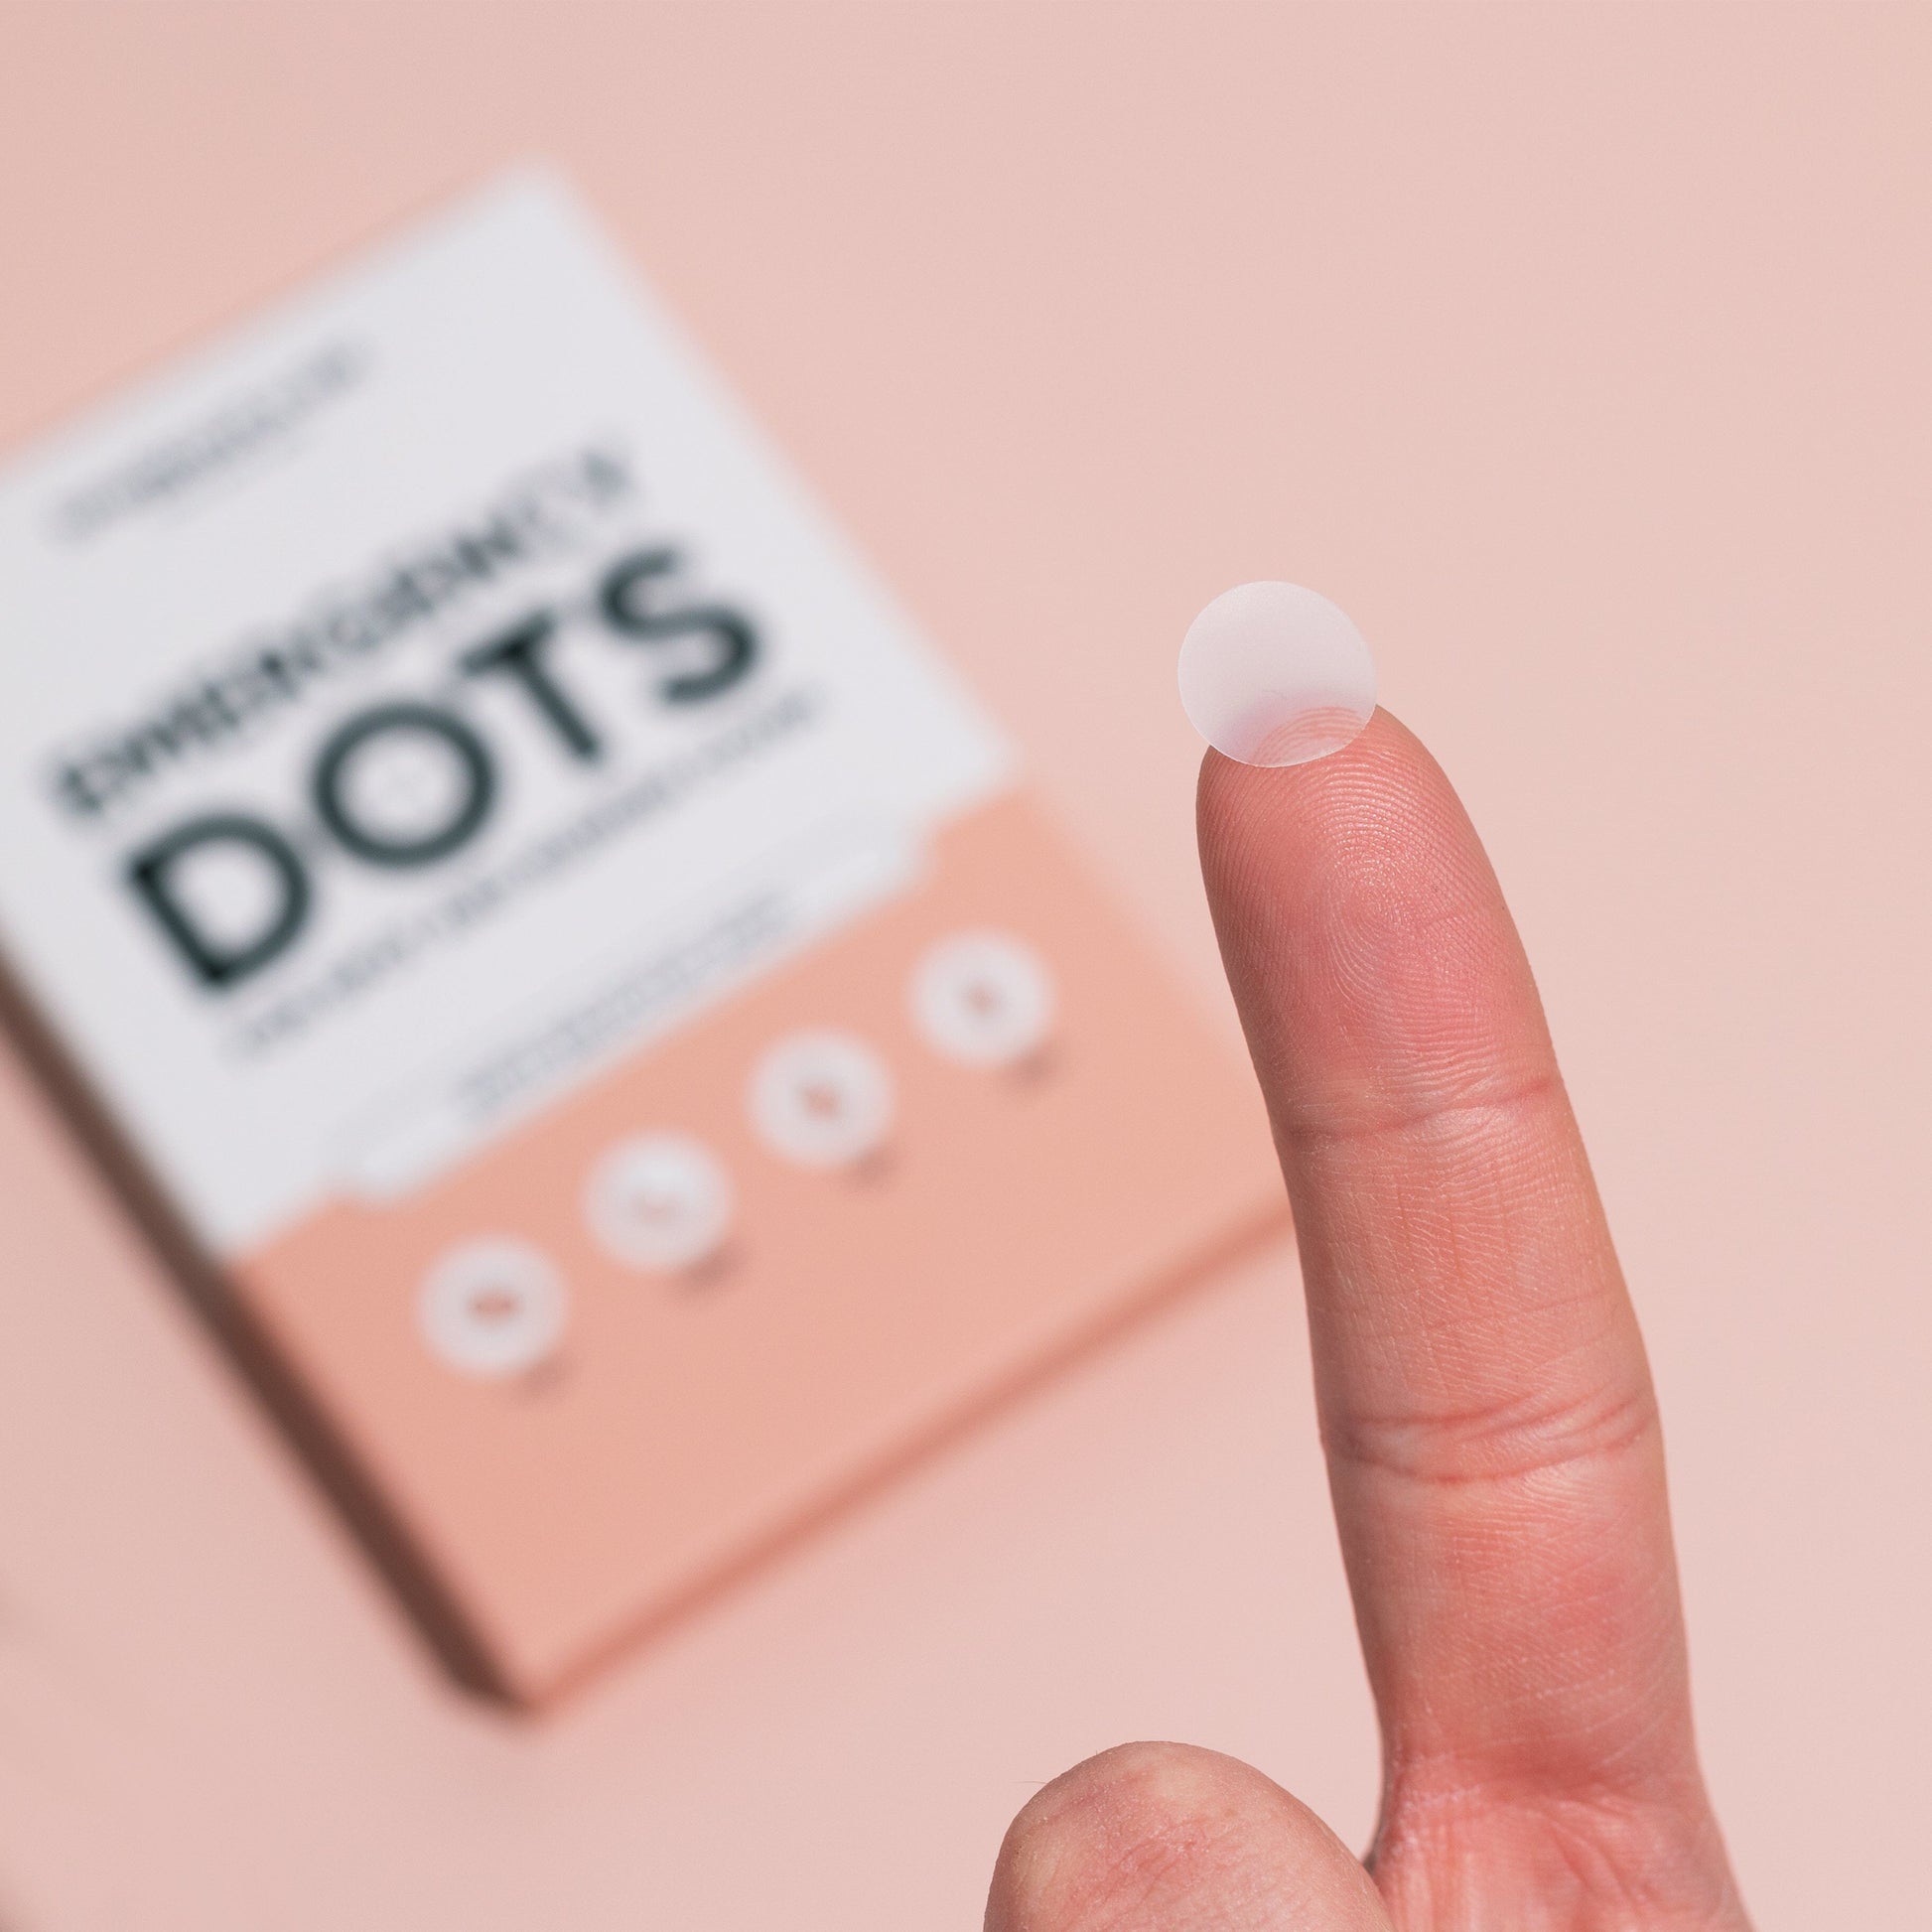 Emergency dots for spots and blemishes with Salicylic Acid breakoutaid 